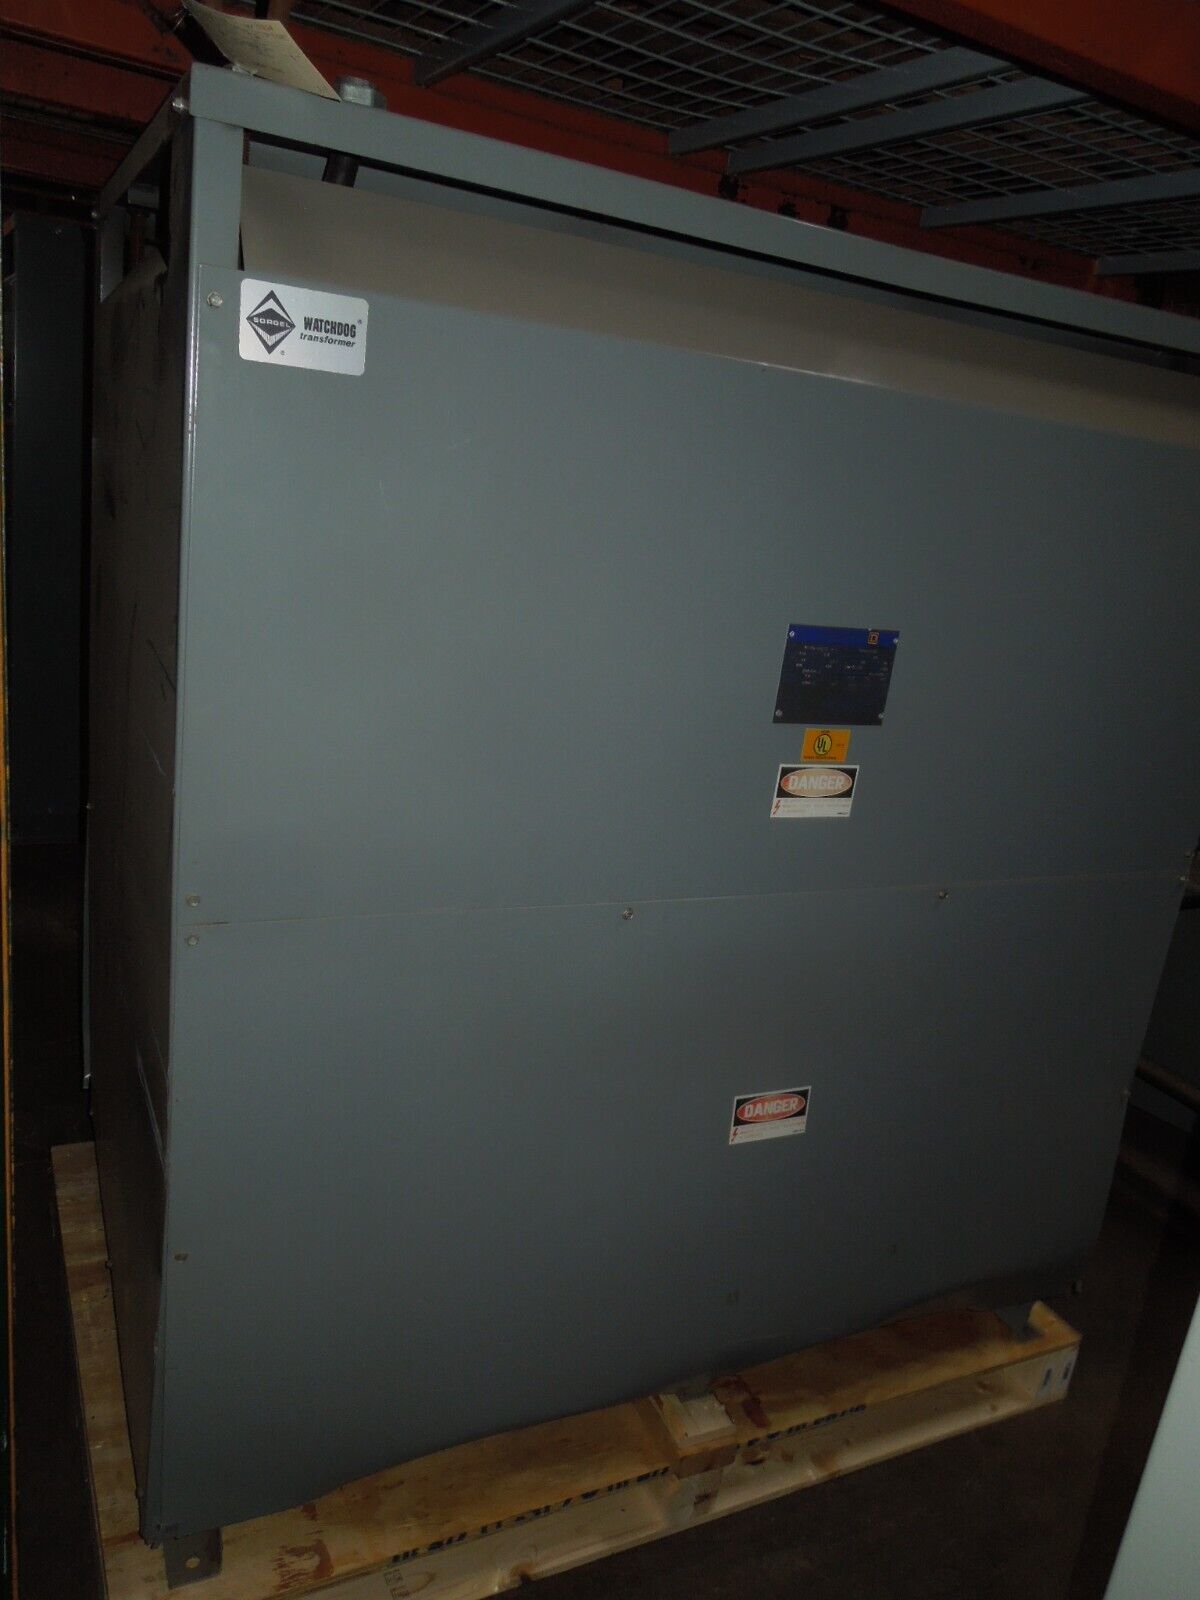 Square D 500KVA 480-208Y/120V 3PH Dry Type Transformer Used Electrically OK - $9,000.00